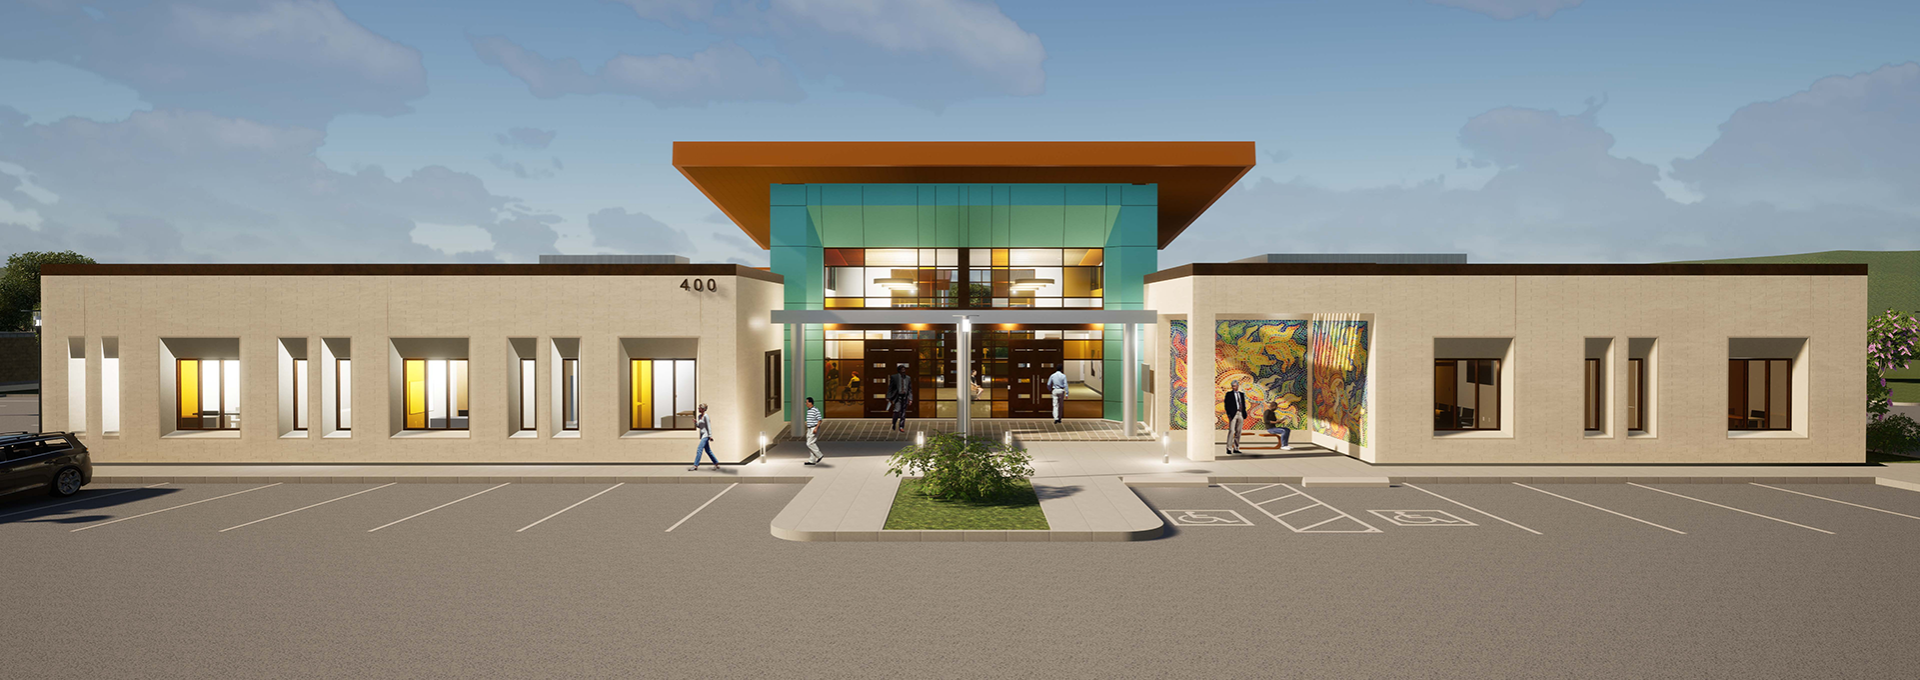 rendering of new city hall building. It is a one story building that is tan, with a roof that is teal, and red-orange